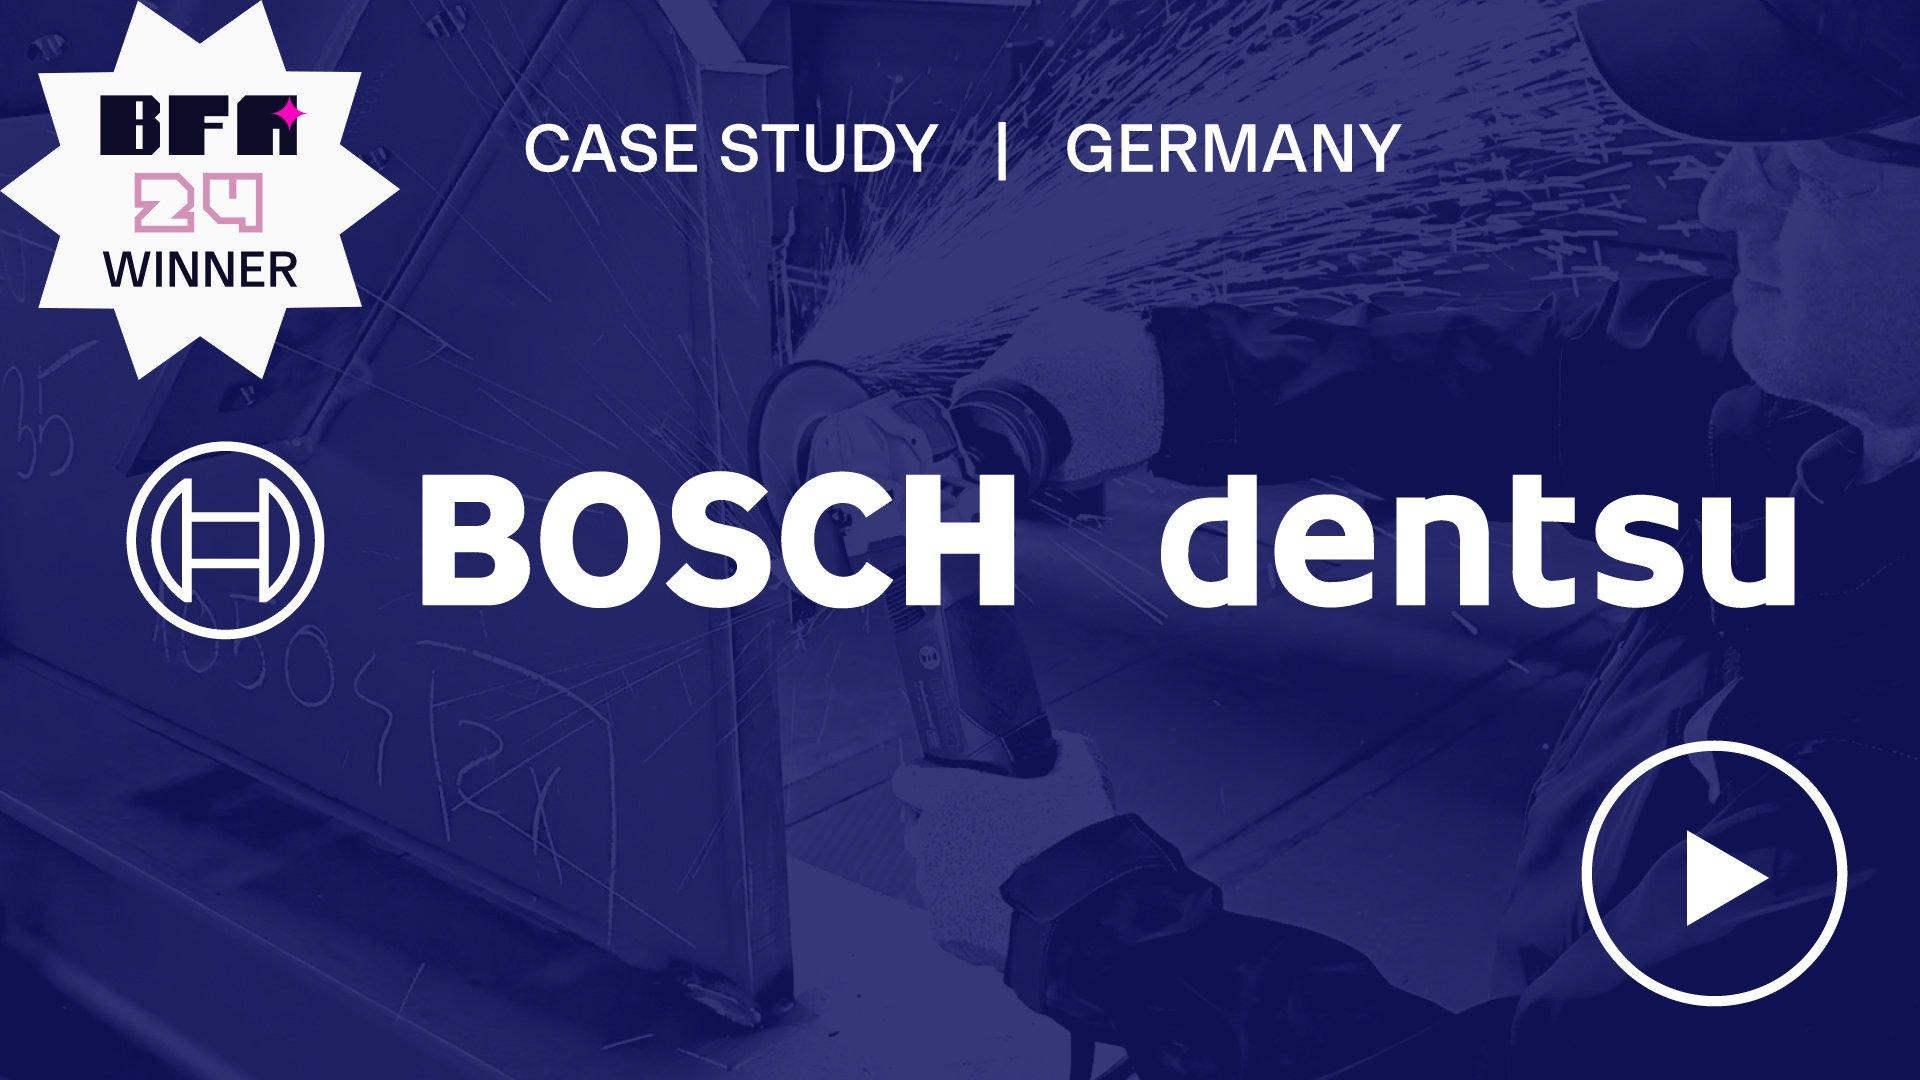 Case study | Germany - BOSCH + dentsu + The Trade Desk - image of a worker with a drill and a blue overlay and a video play button